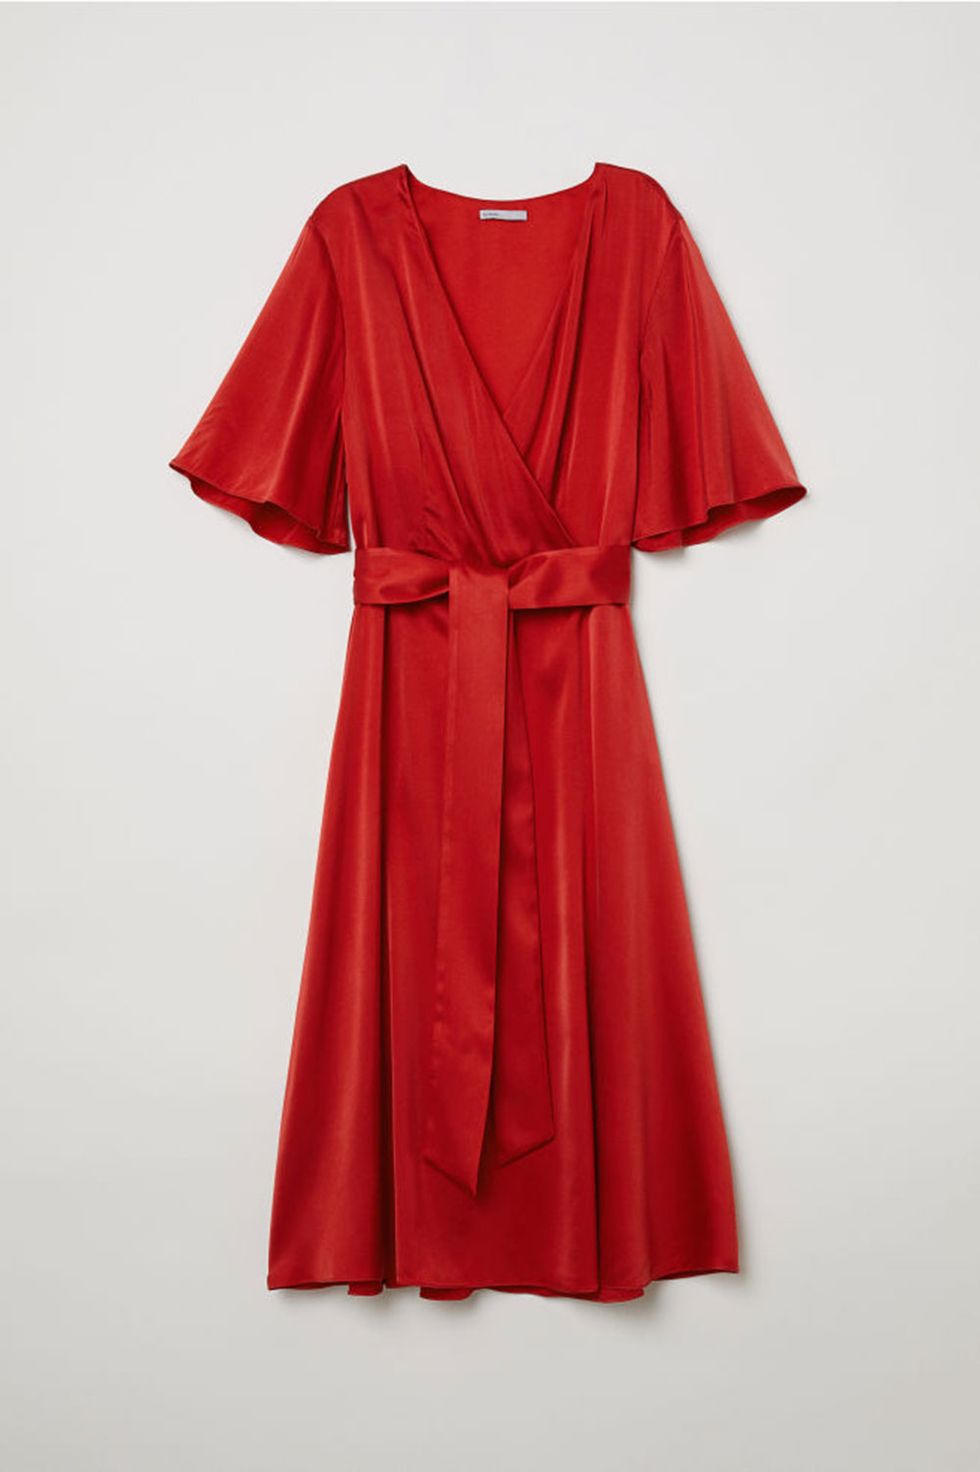 Clothing, Red, Day dress, Sleeve, Dress, Robe, Outerwear, Textile, Nightwear, Costume, 